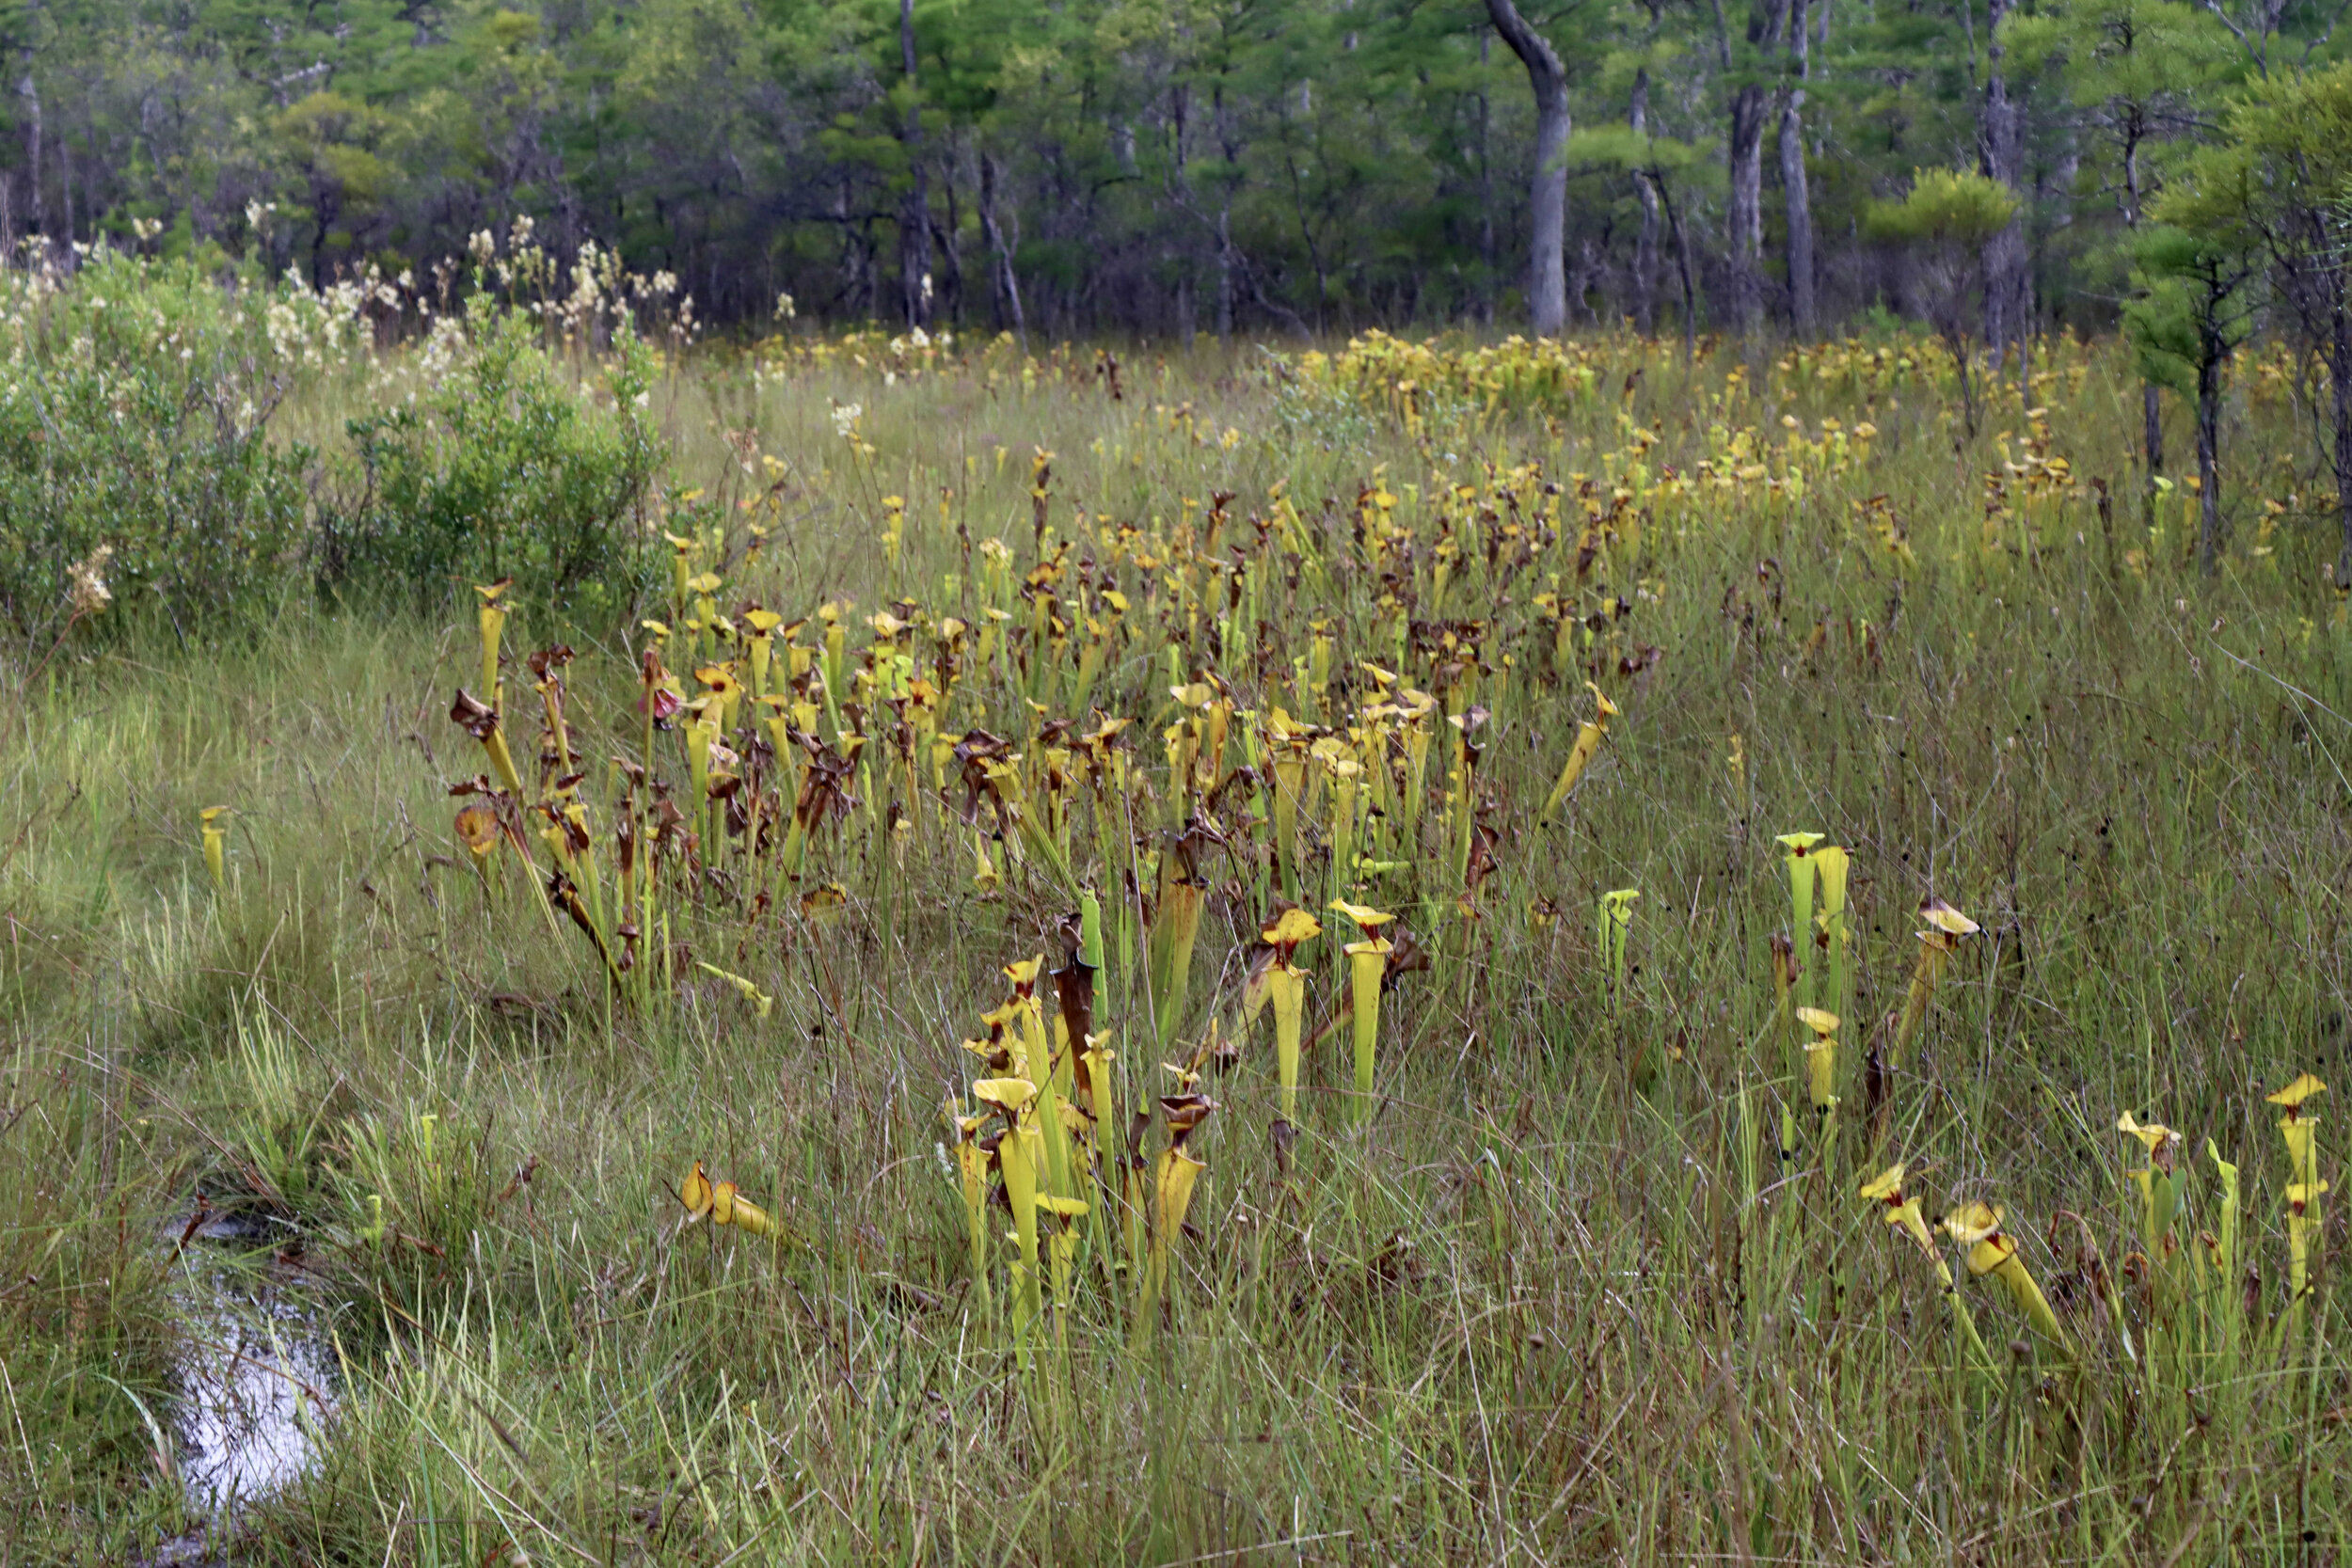  Yellow pitcher plants standing tall amongst the grass - these plants grow in ecotones between dry longleaf forest and wetland areas.   (Apalachicola National Forest) 